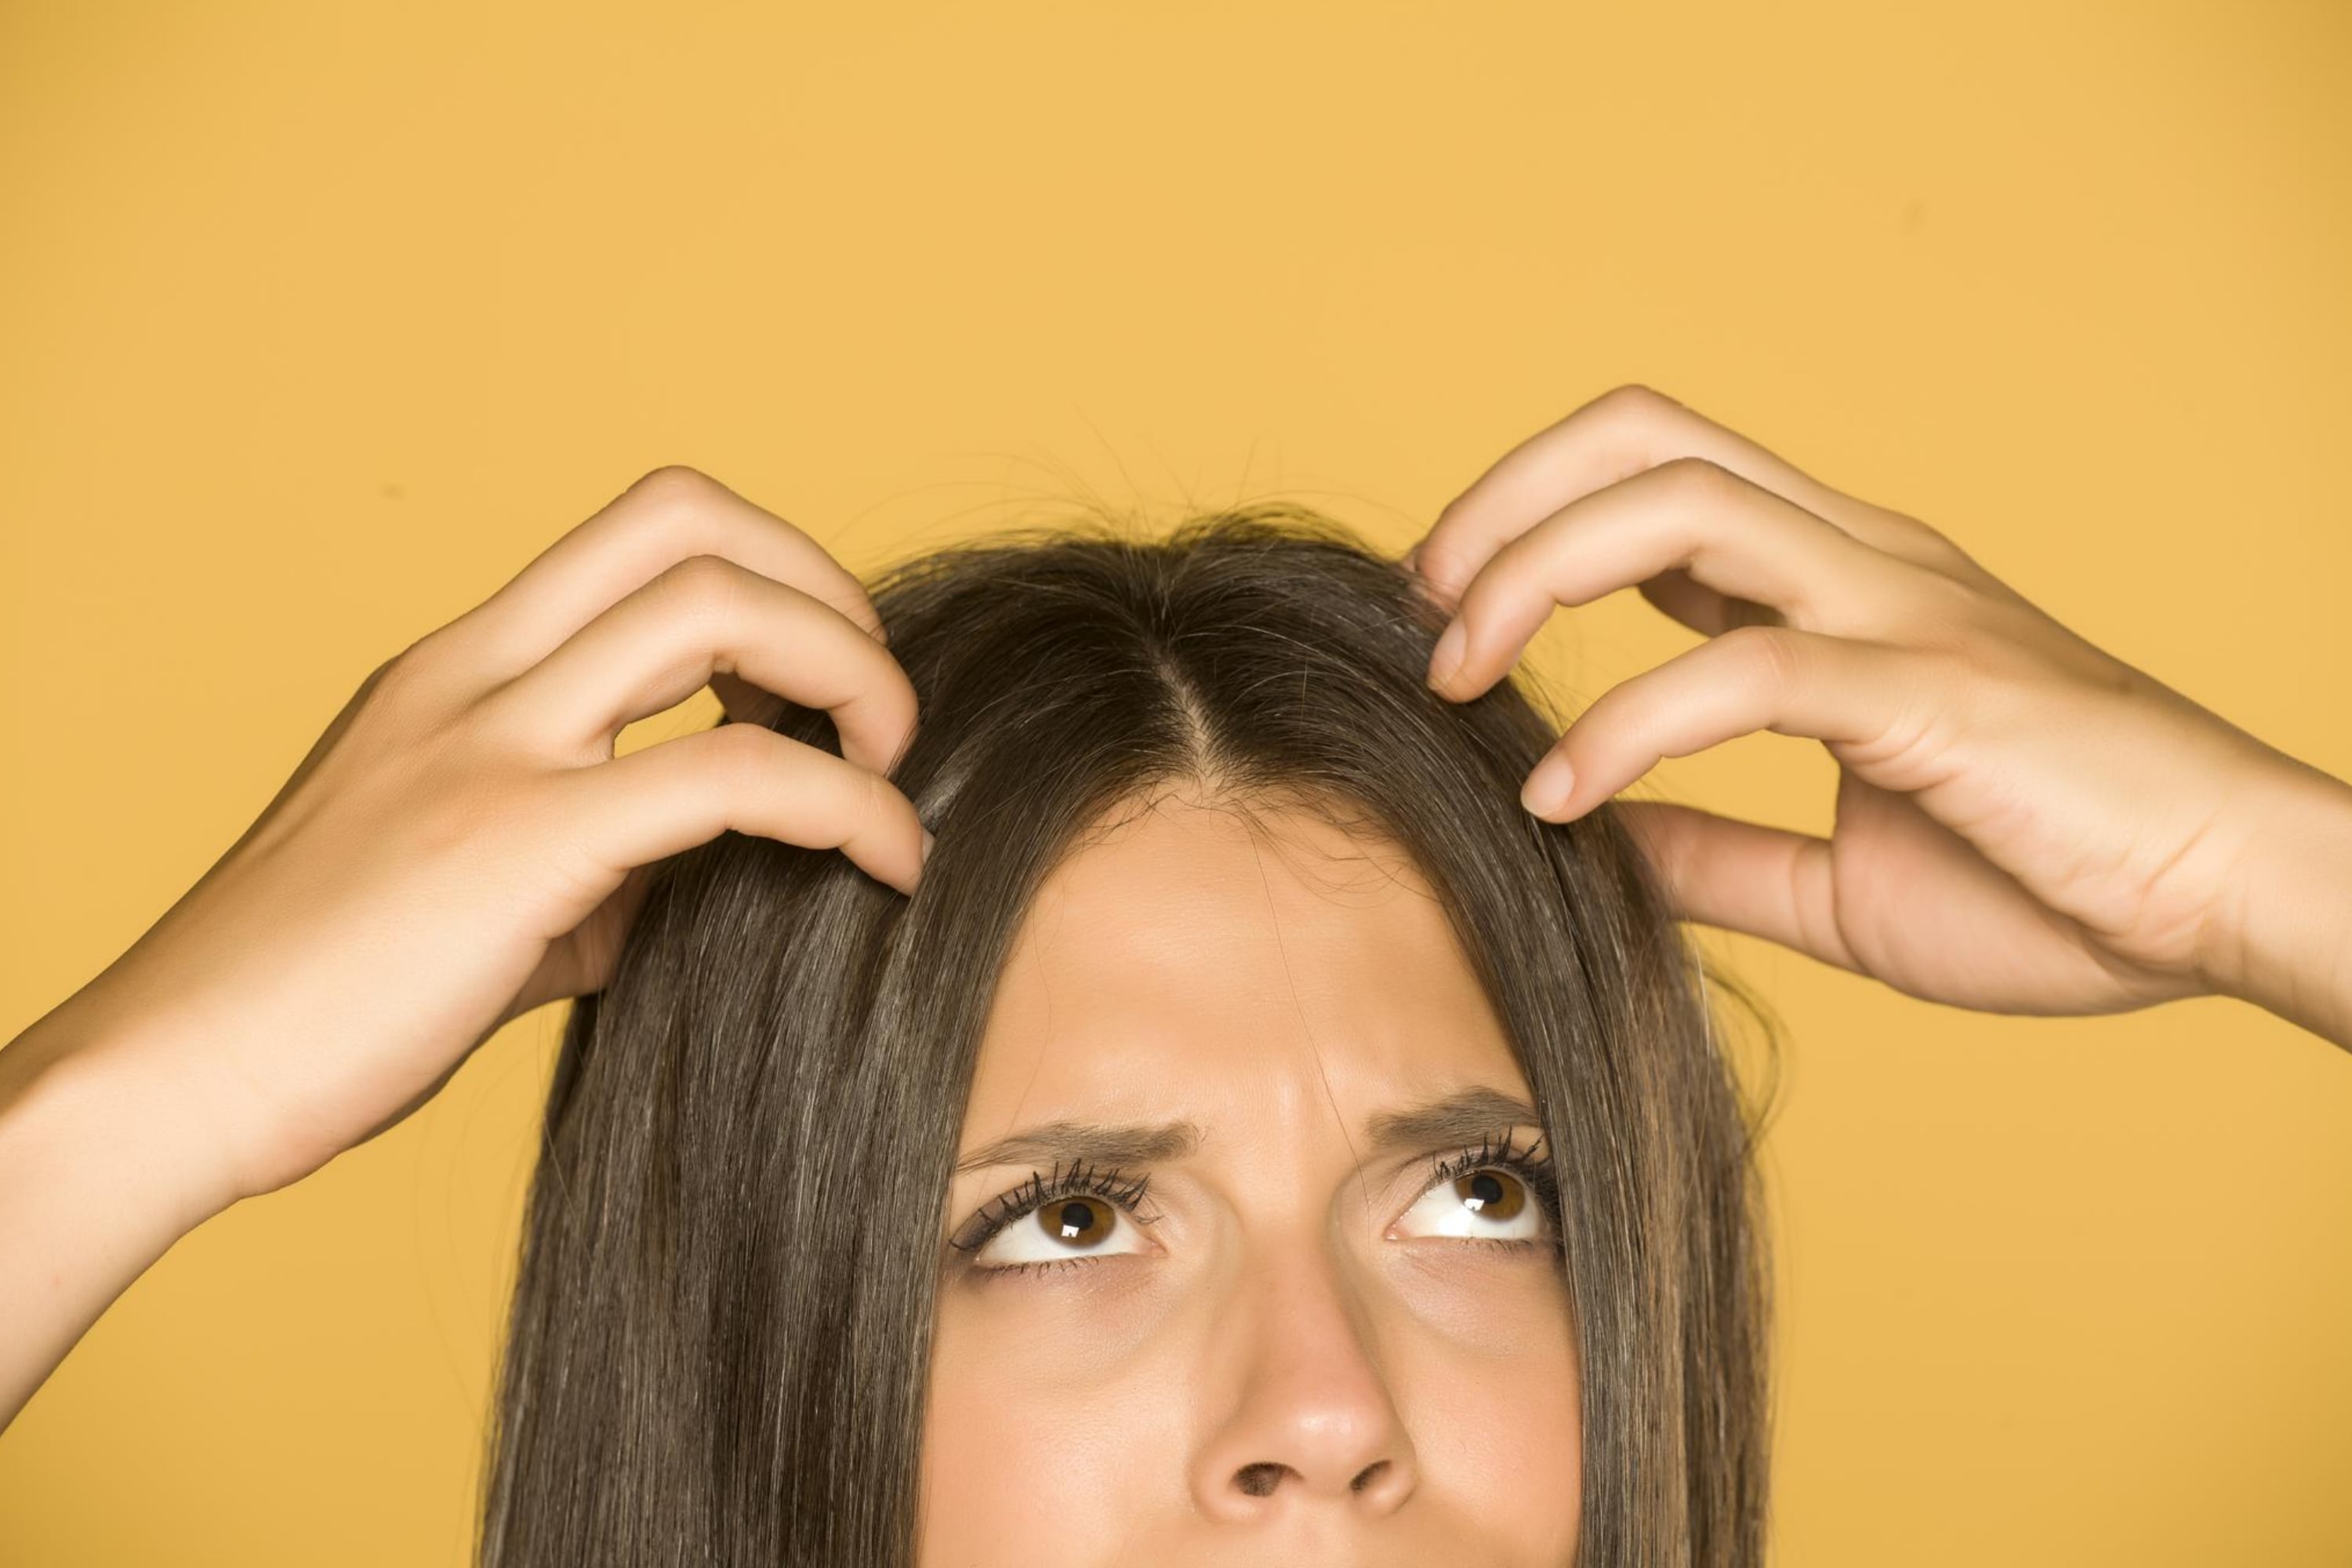 What Is That Sebum Under My Nails When I Scratch the Scalp? - Beezzly